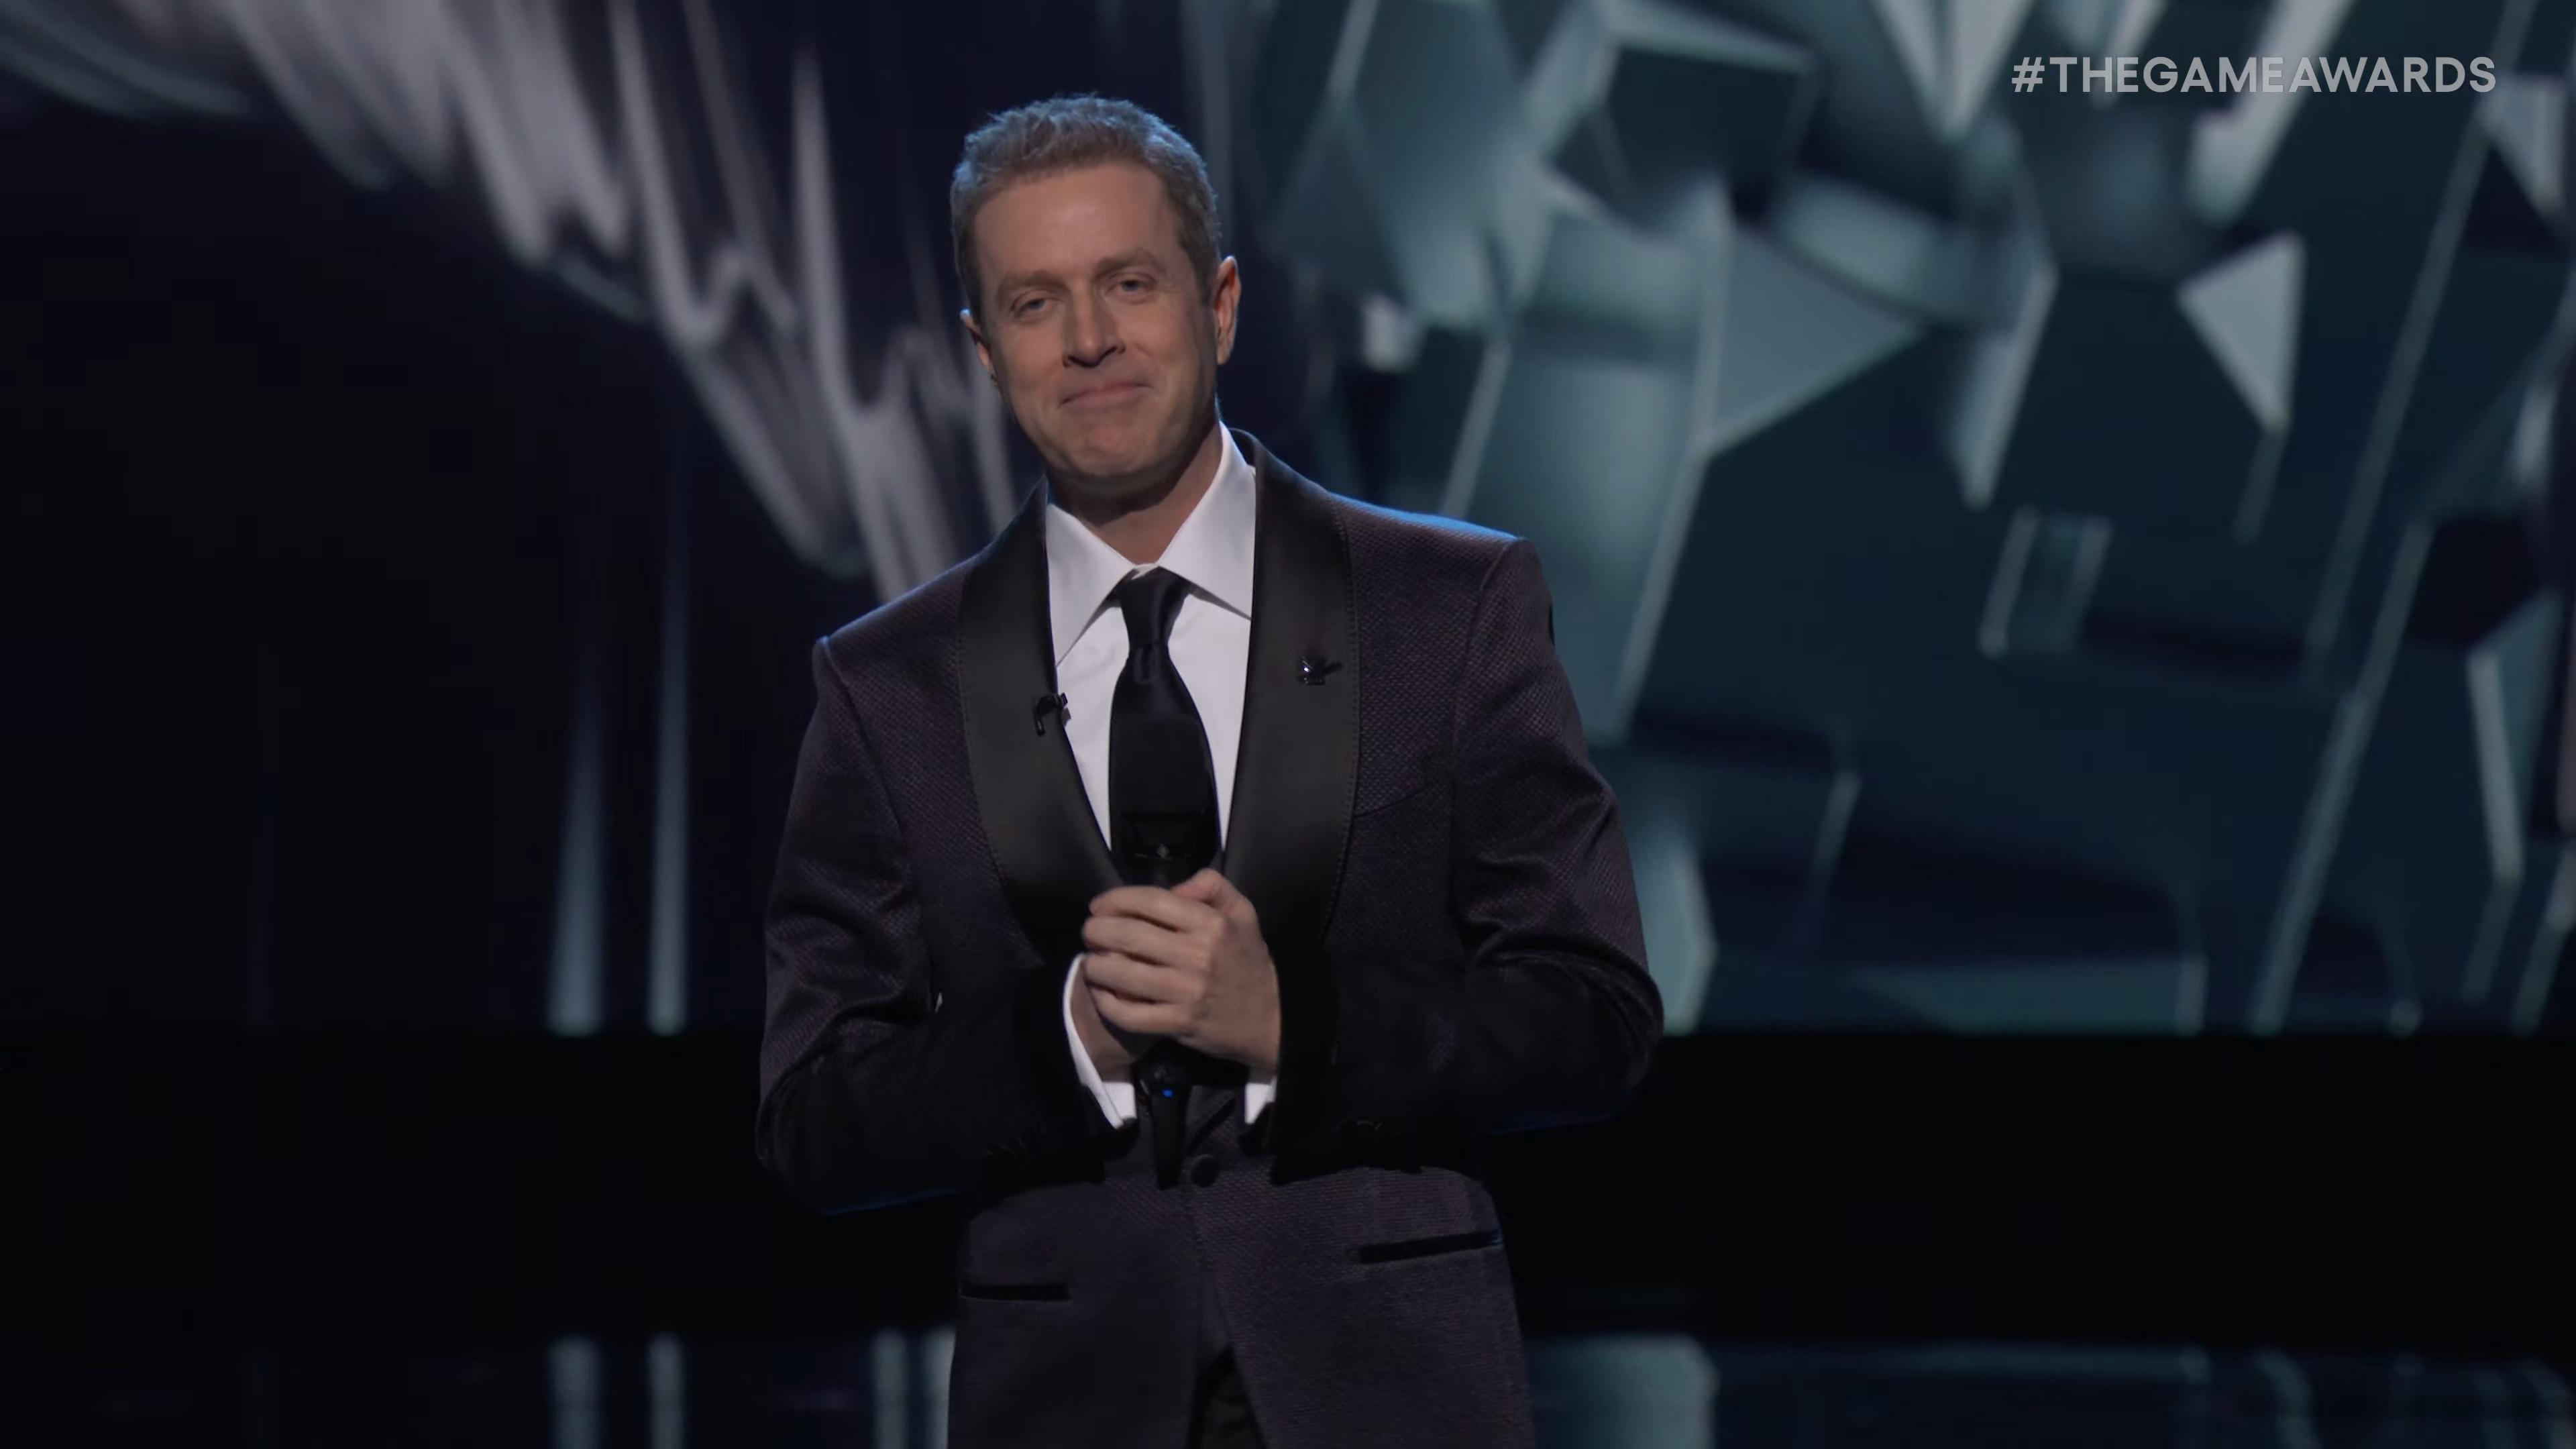 The Game Awards 2022: Every award winner and nominee